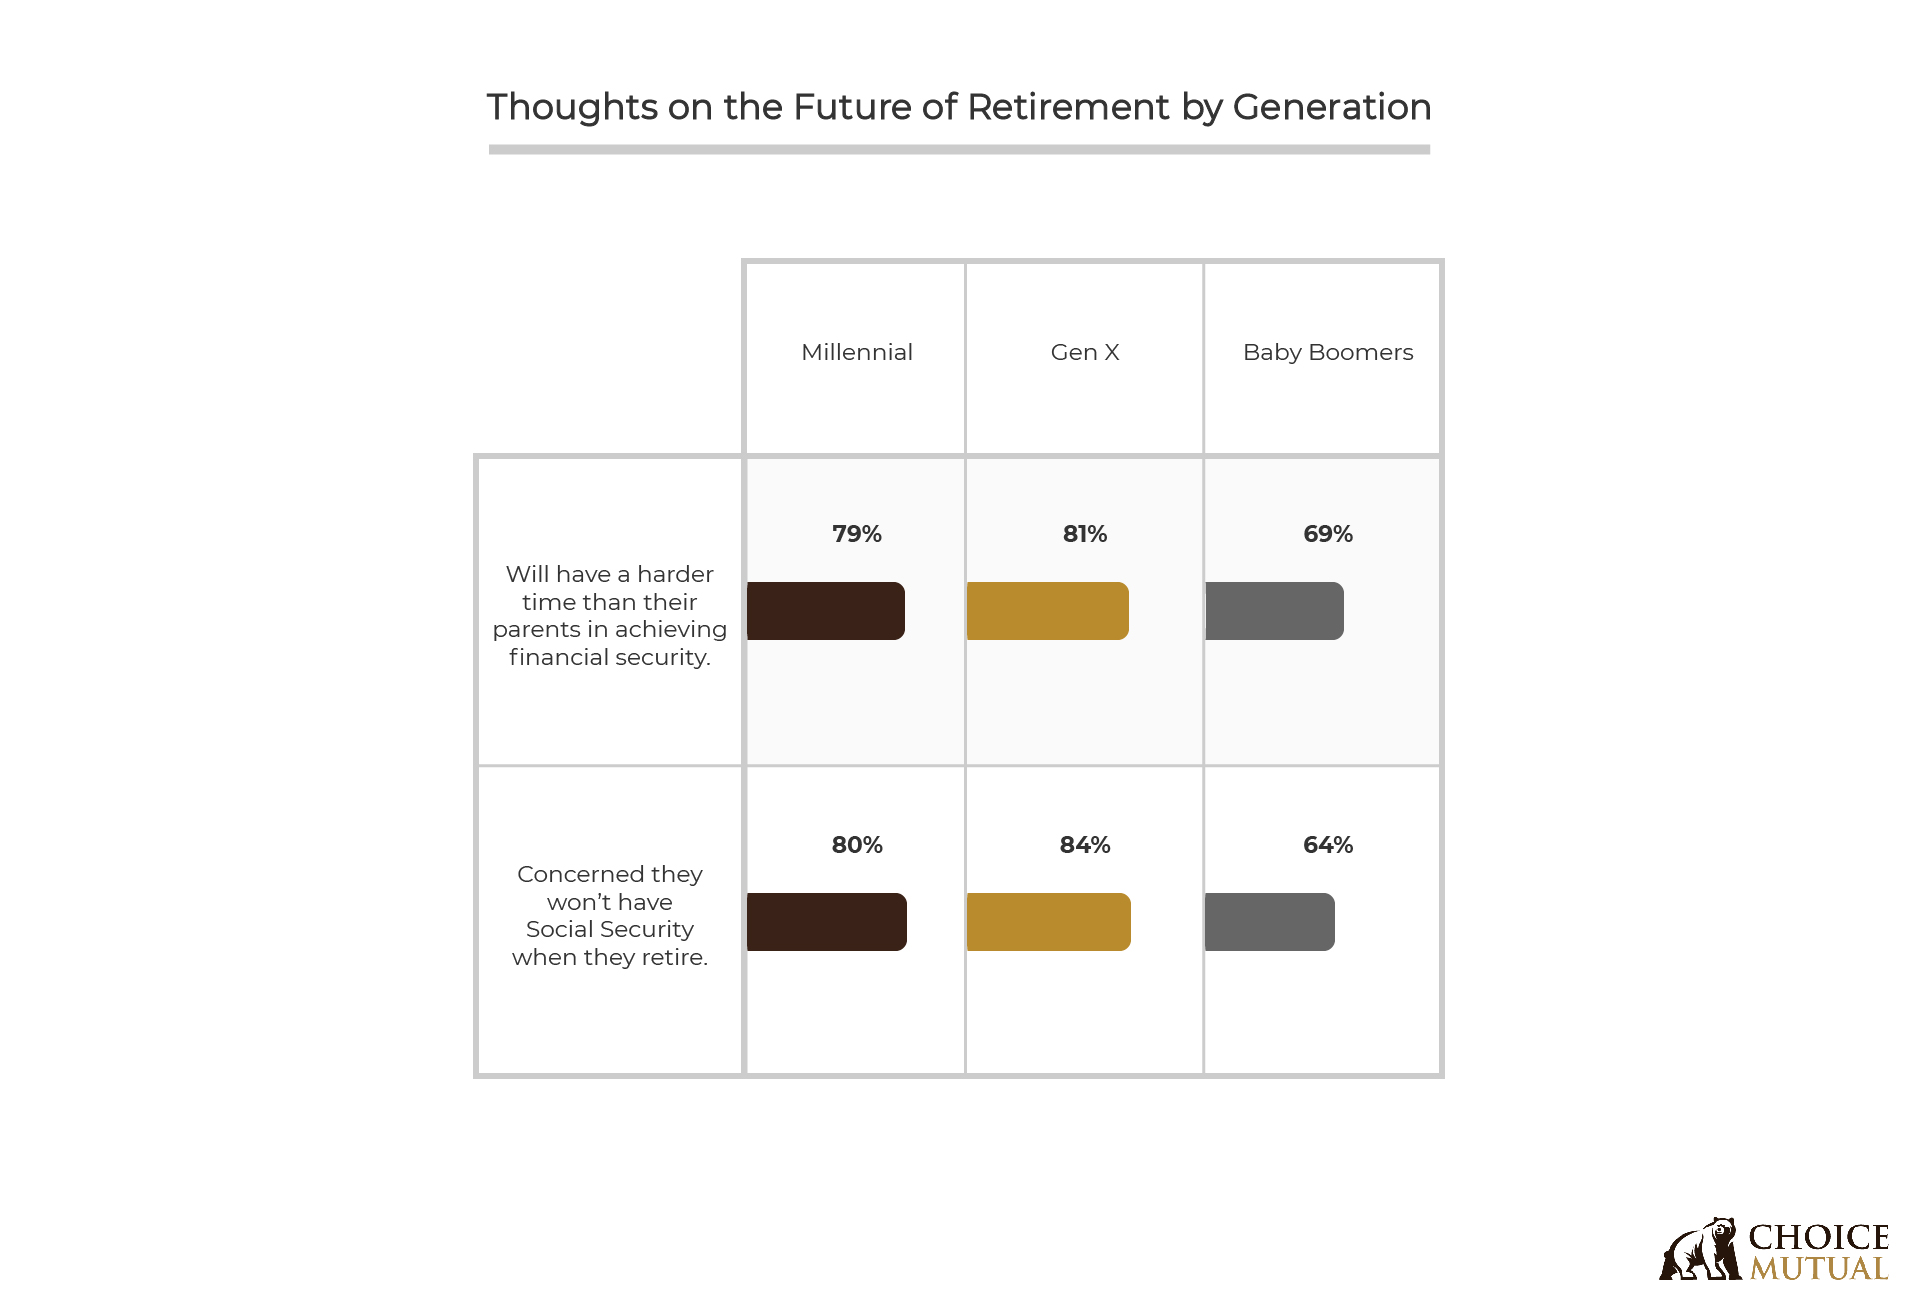 A chart showing the each generation's thoughts on retirement